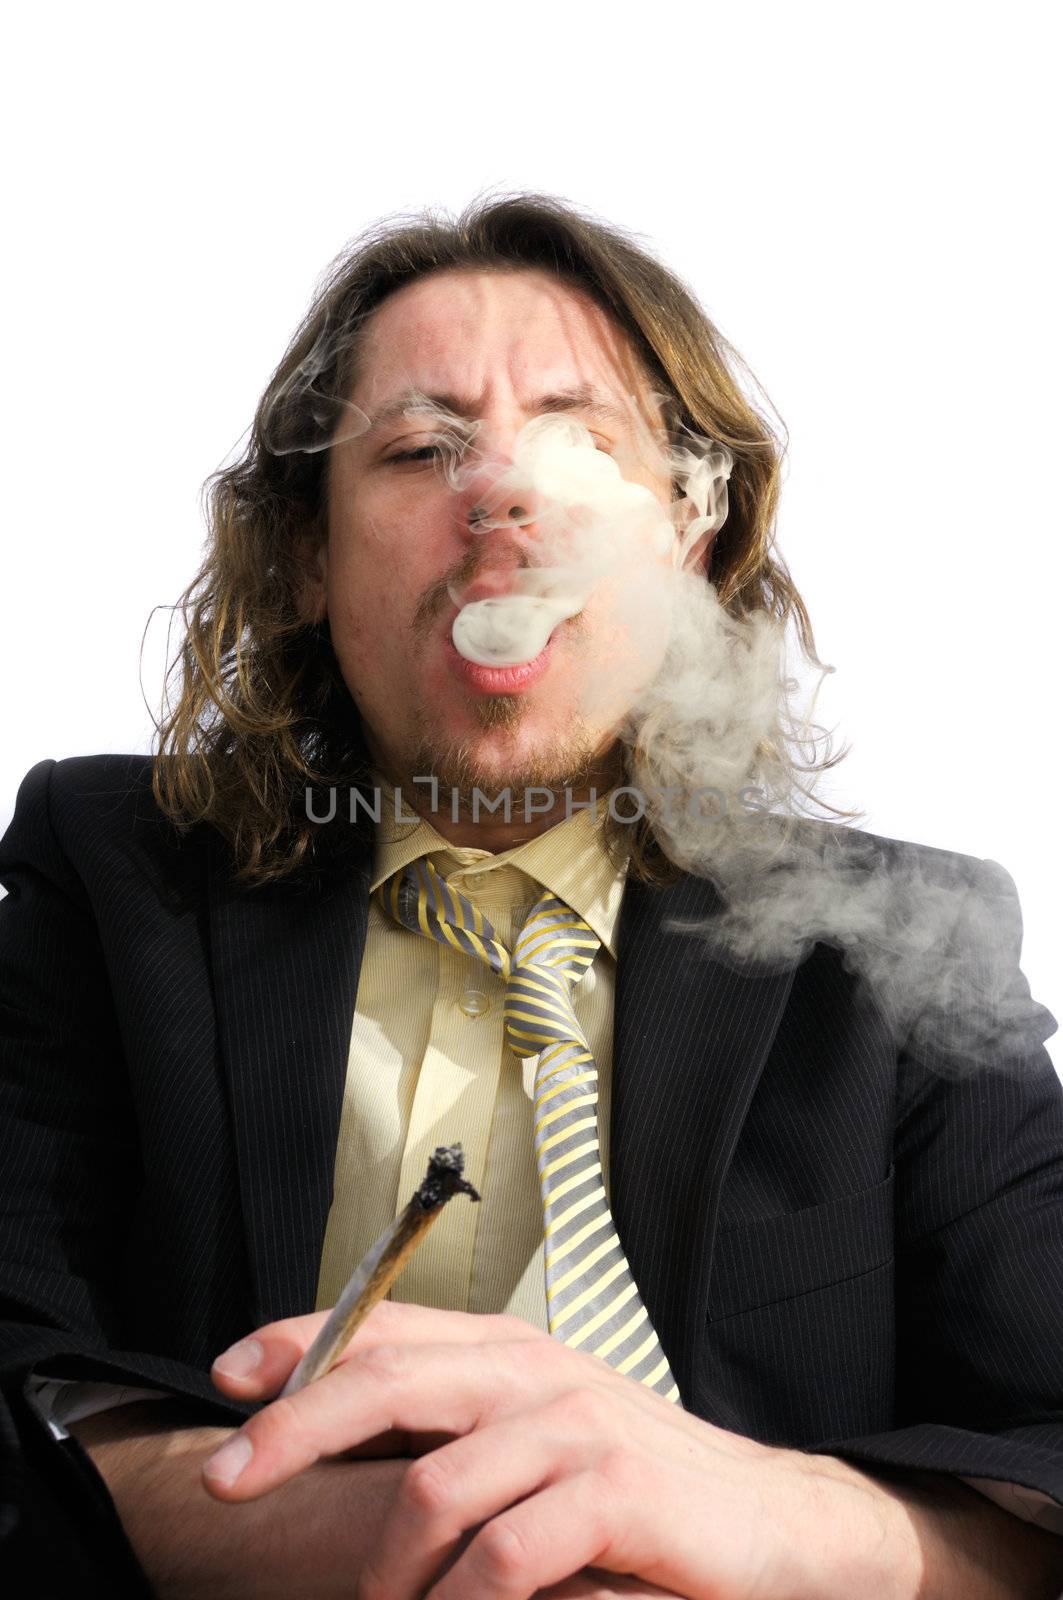 Young business man smoking weed after work